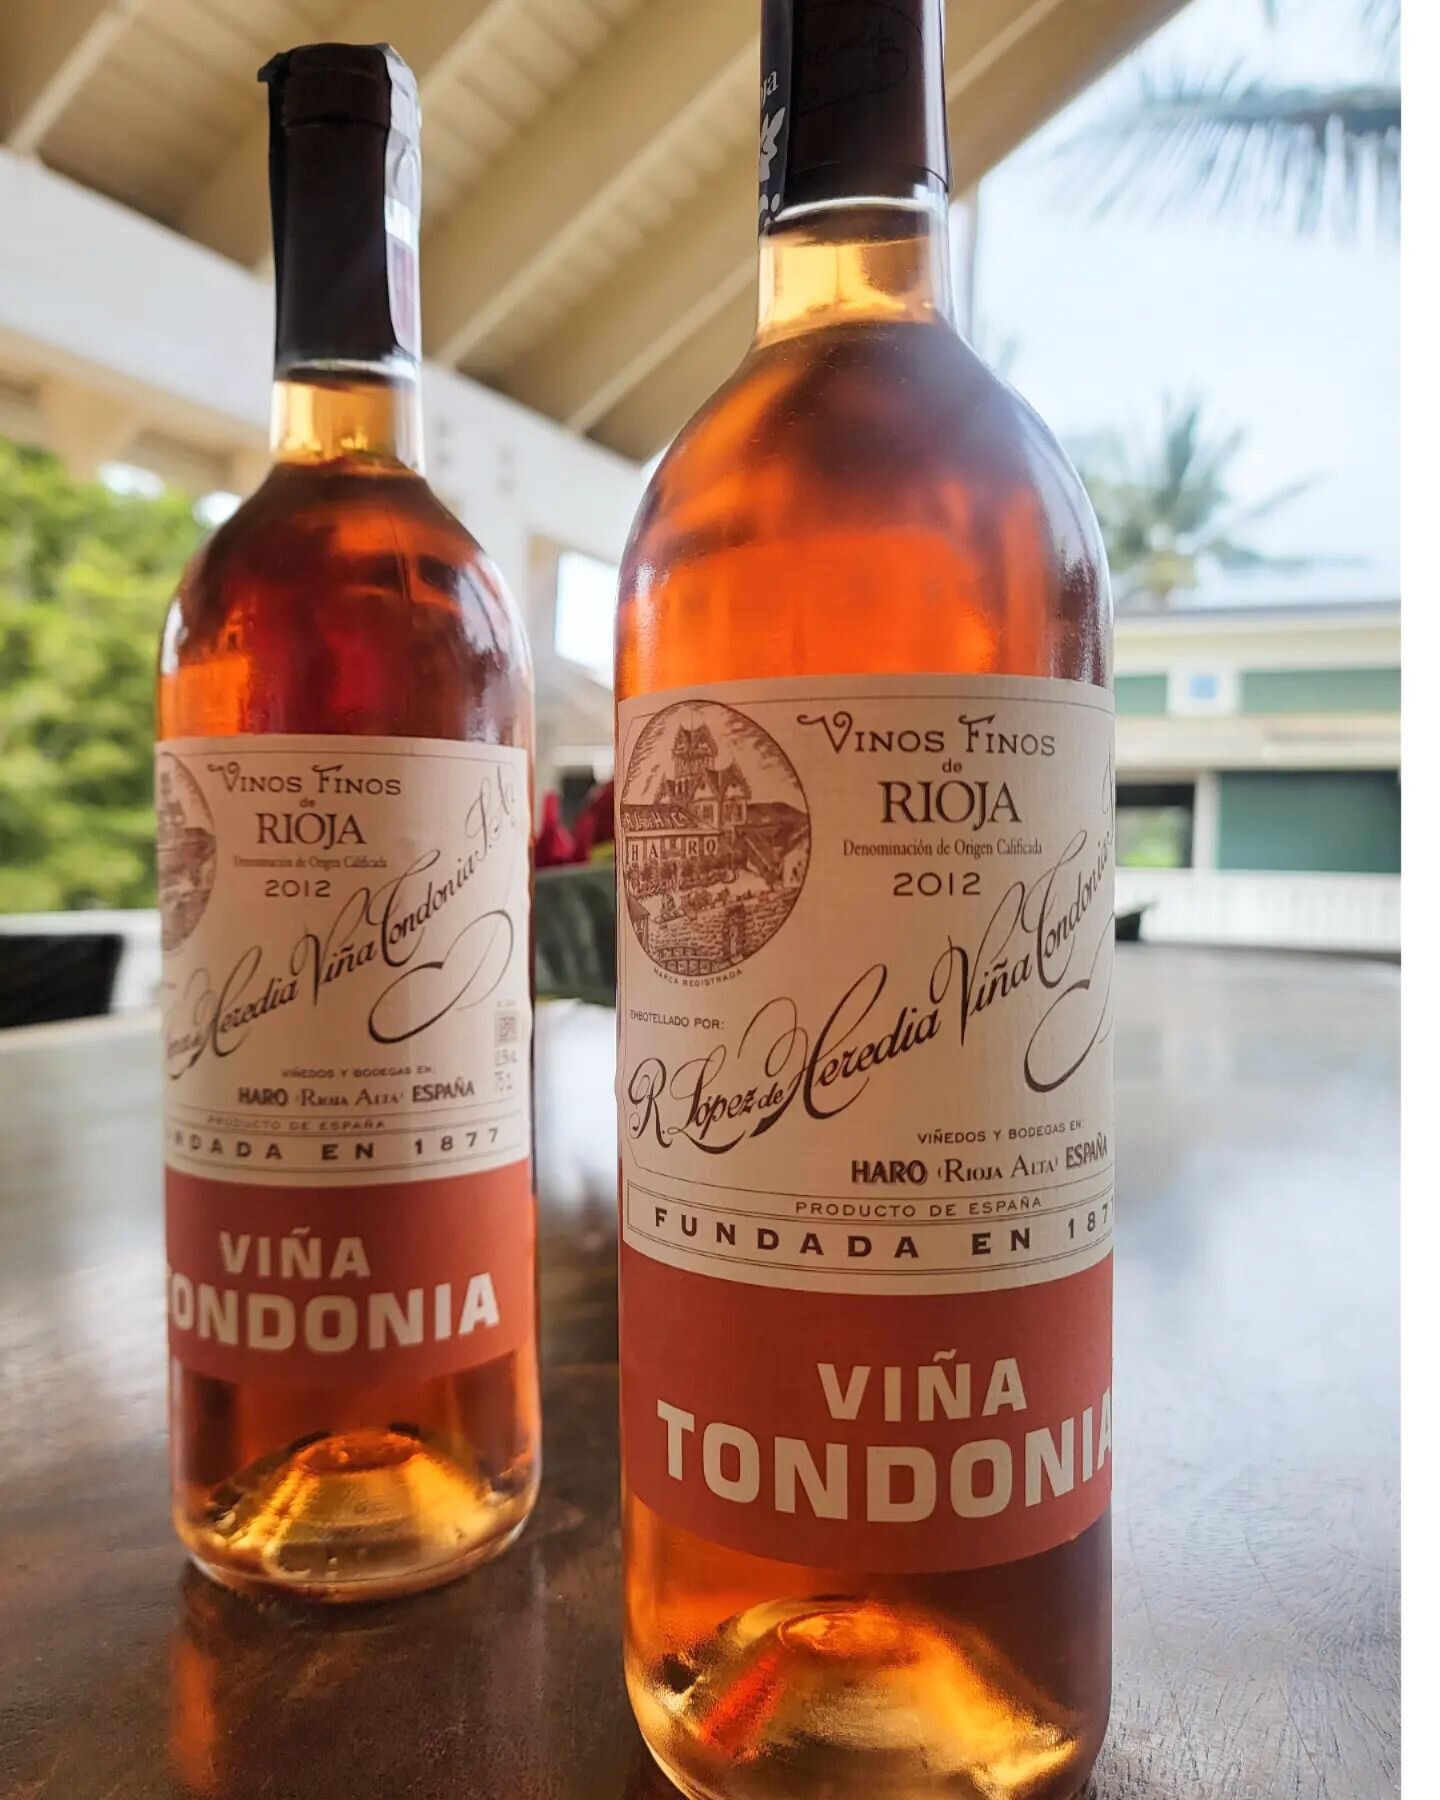 L&oacute;pez de Heredia Vi&ntilde;a Tondonia Gran Reserva 2012 Rosado

This unusual ros&eacute; is a blend of 60% Garnacho (they use the masculine form of the name of the grape), 30% Tempranillo and 10% Viura that matured in American oak barrels for 